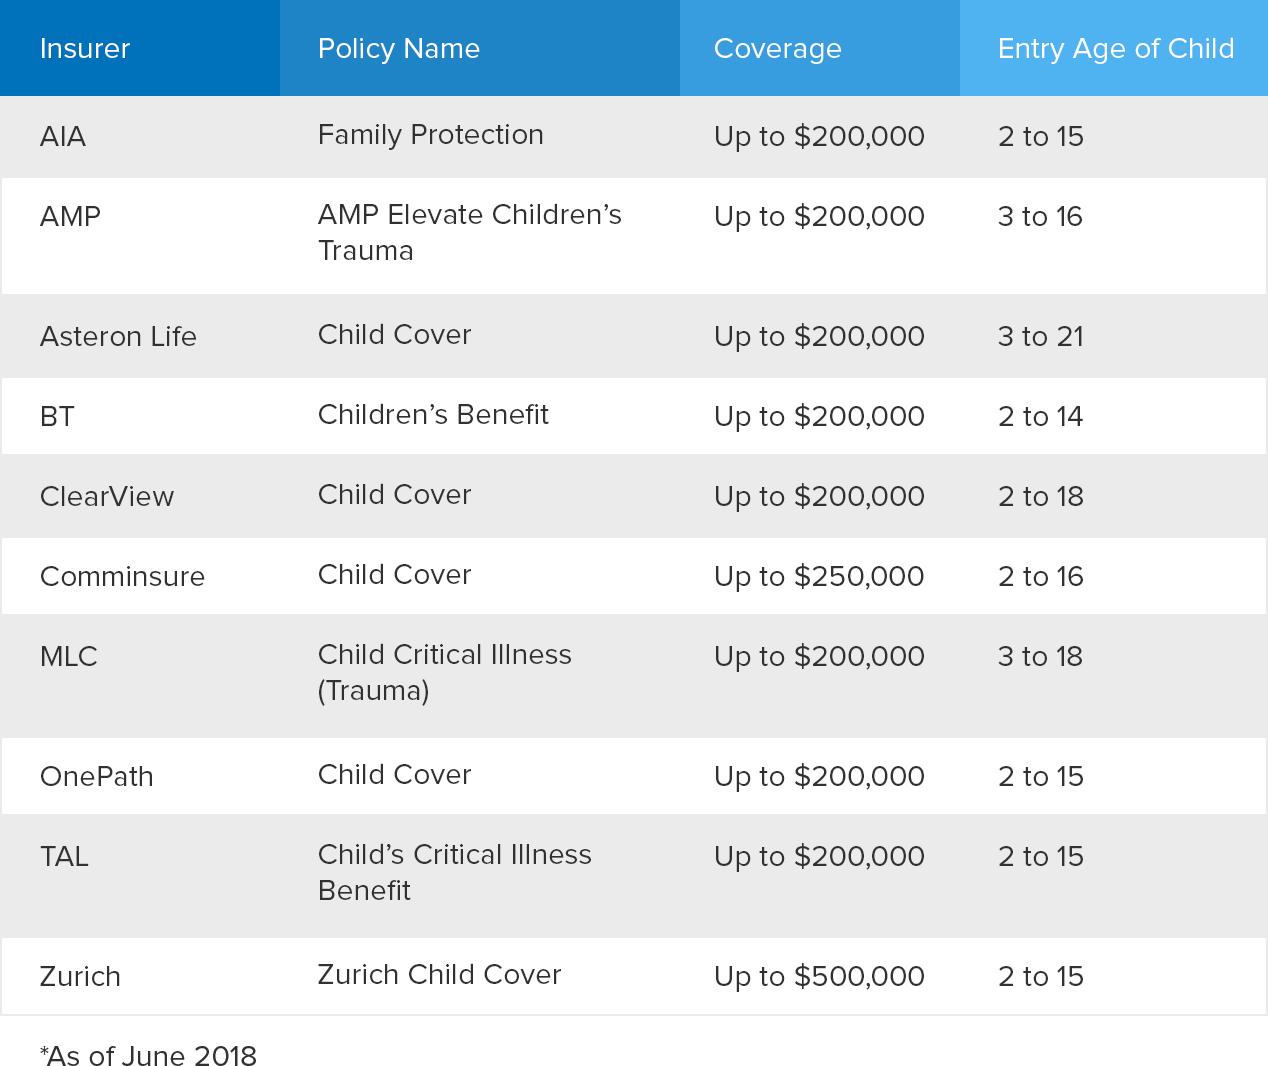 Child cover amount and entry age for different life insurers in Australia